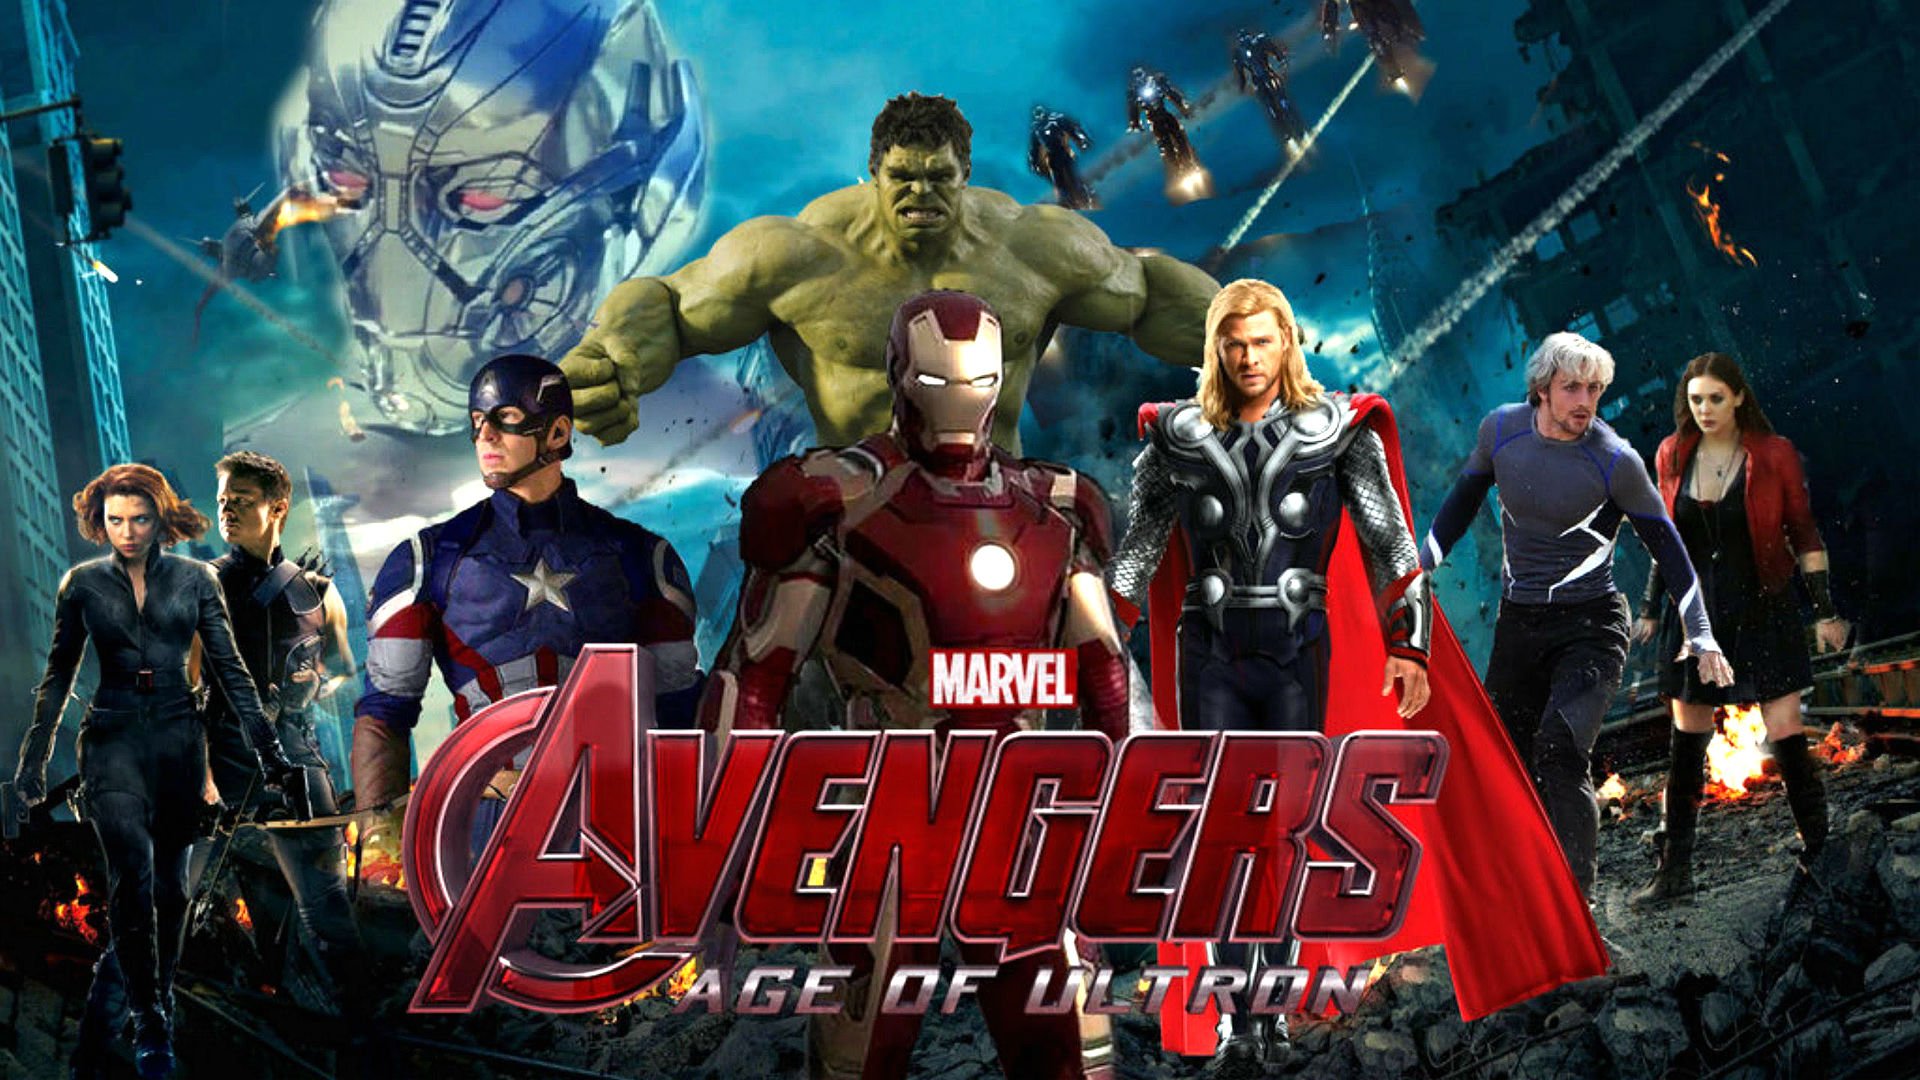 age of ultron 2015 hd wallpapers 7 avengers age of ultron 2015 hd